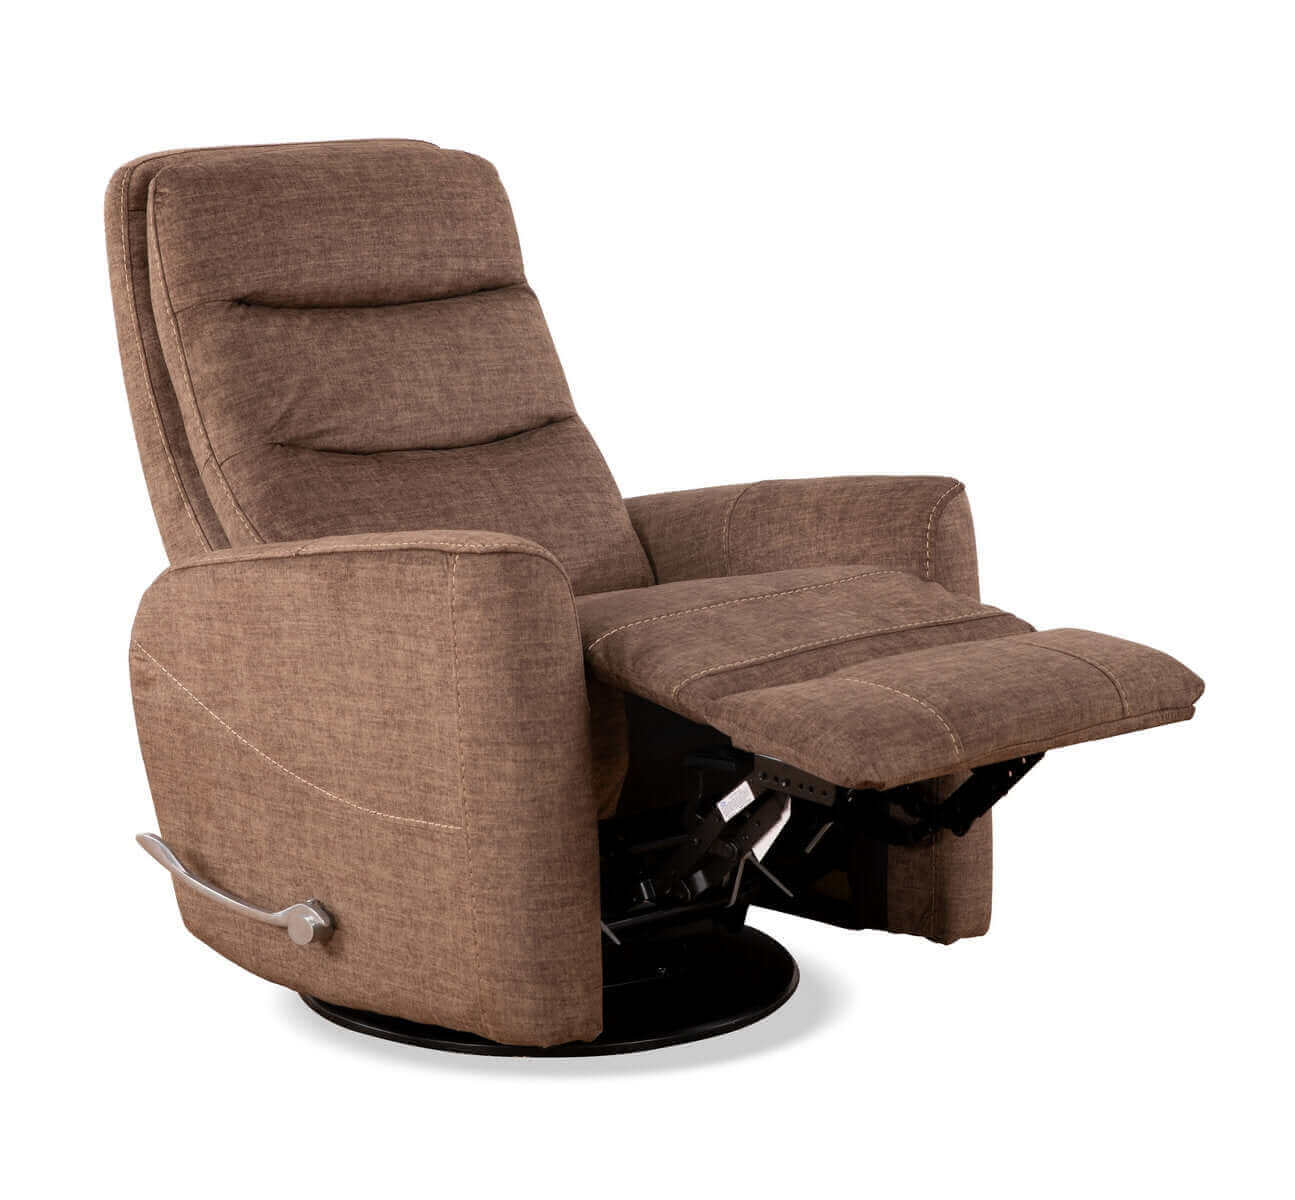 International Furniture Distribution Centre - Chocolate Fabric Manual Recliner Chair with Solid Hardwood Frame - IF 6322